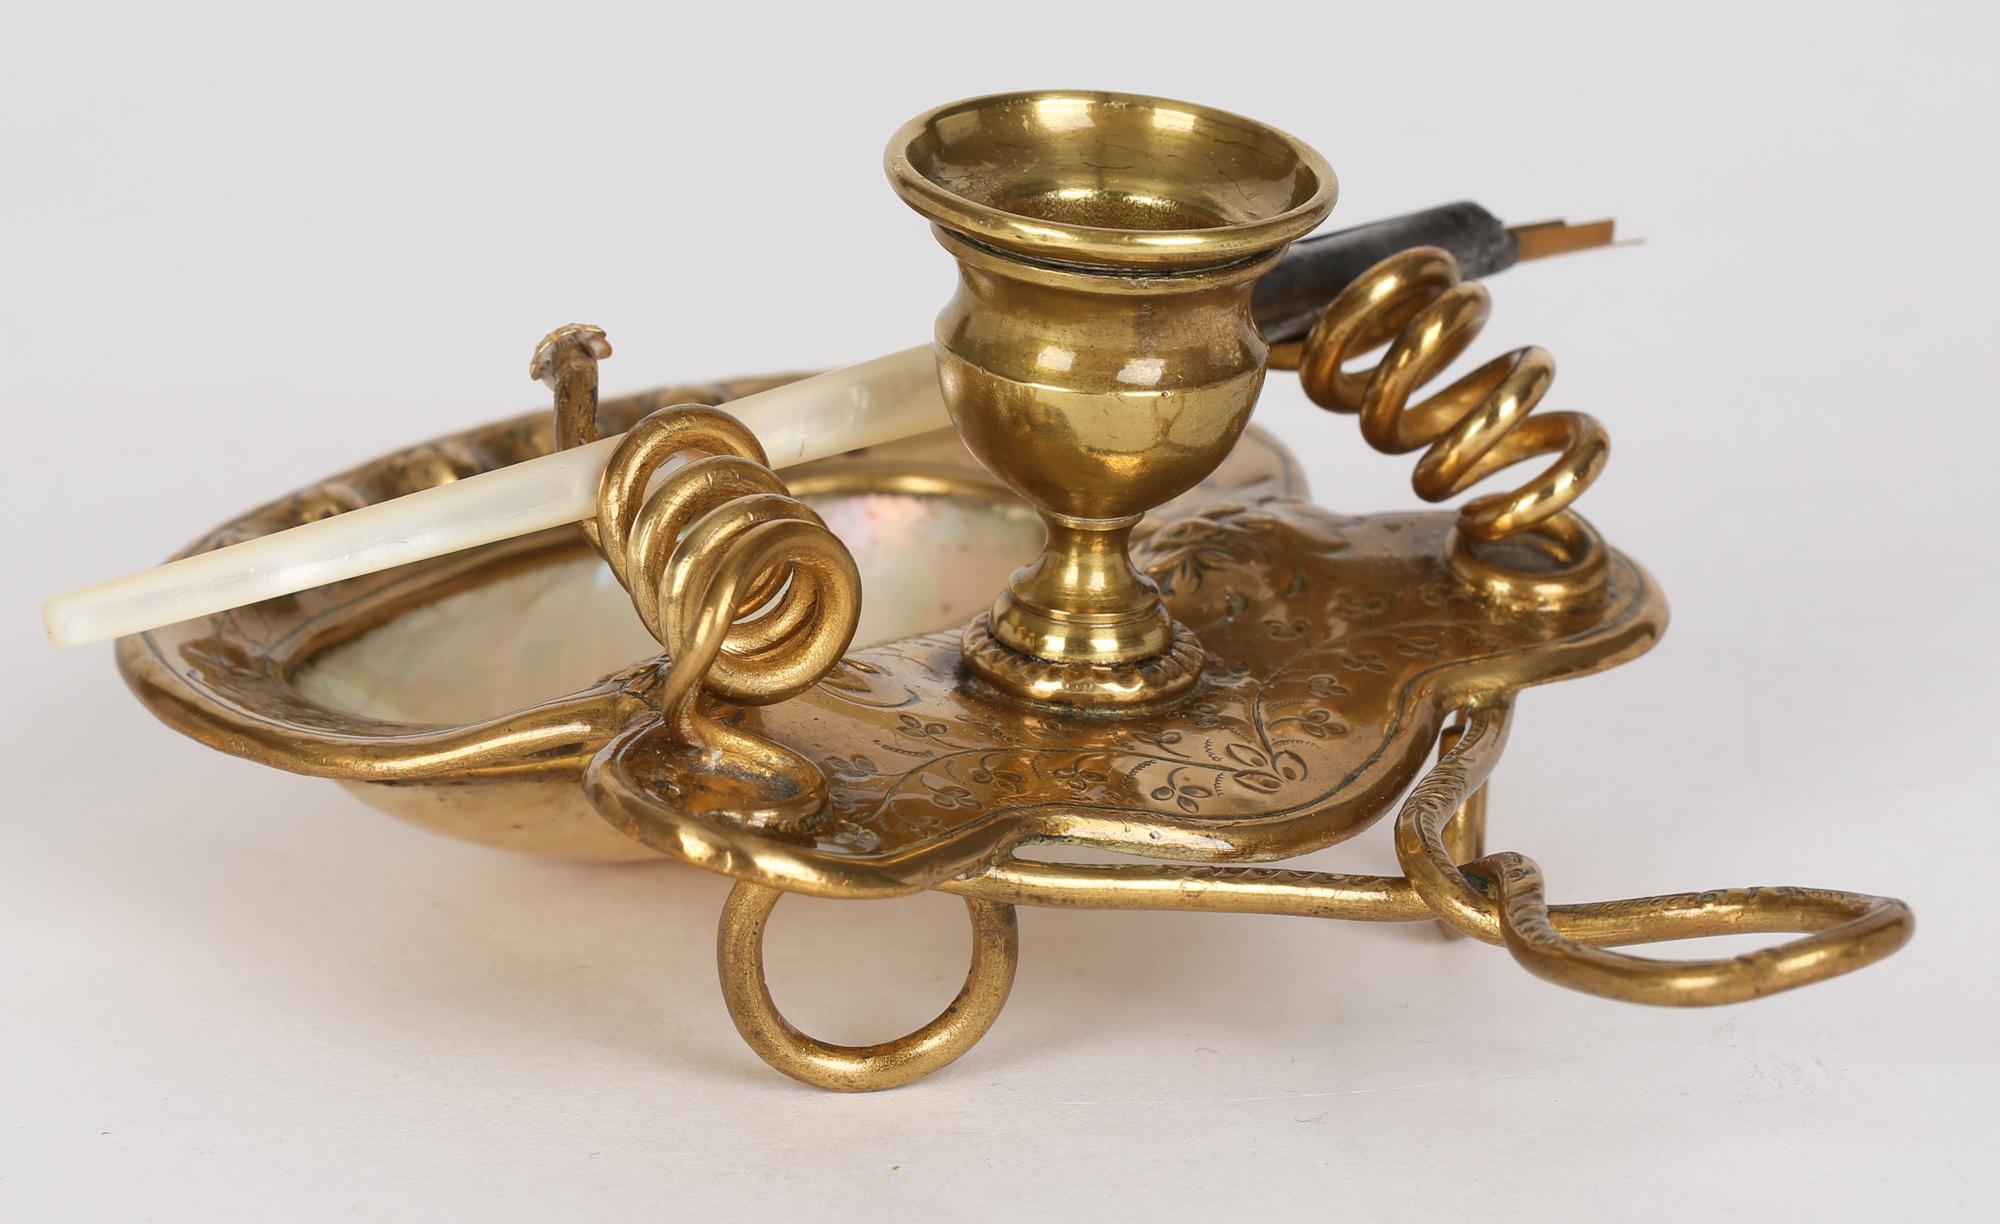 A very finely made antique French Palais Royal ormolu mounted mother of pearl desk stand with pen dating from around 1900. The stand comprises of an ornate looped wire work carrying handle with a candle holder mounted on a shaped metal body embossed